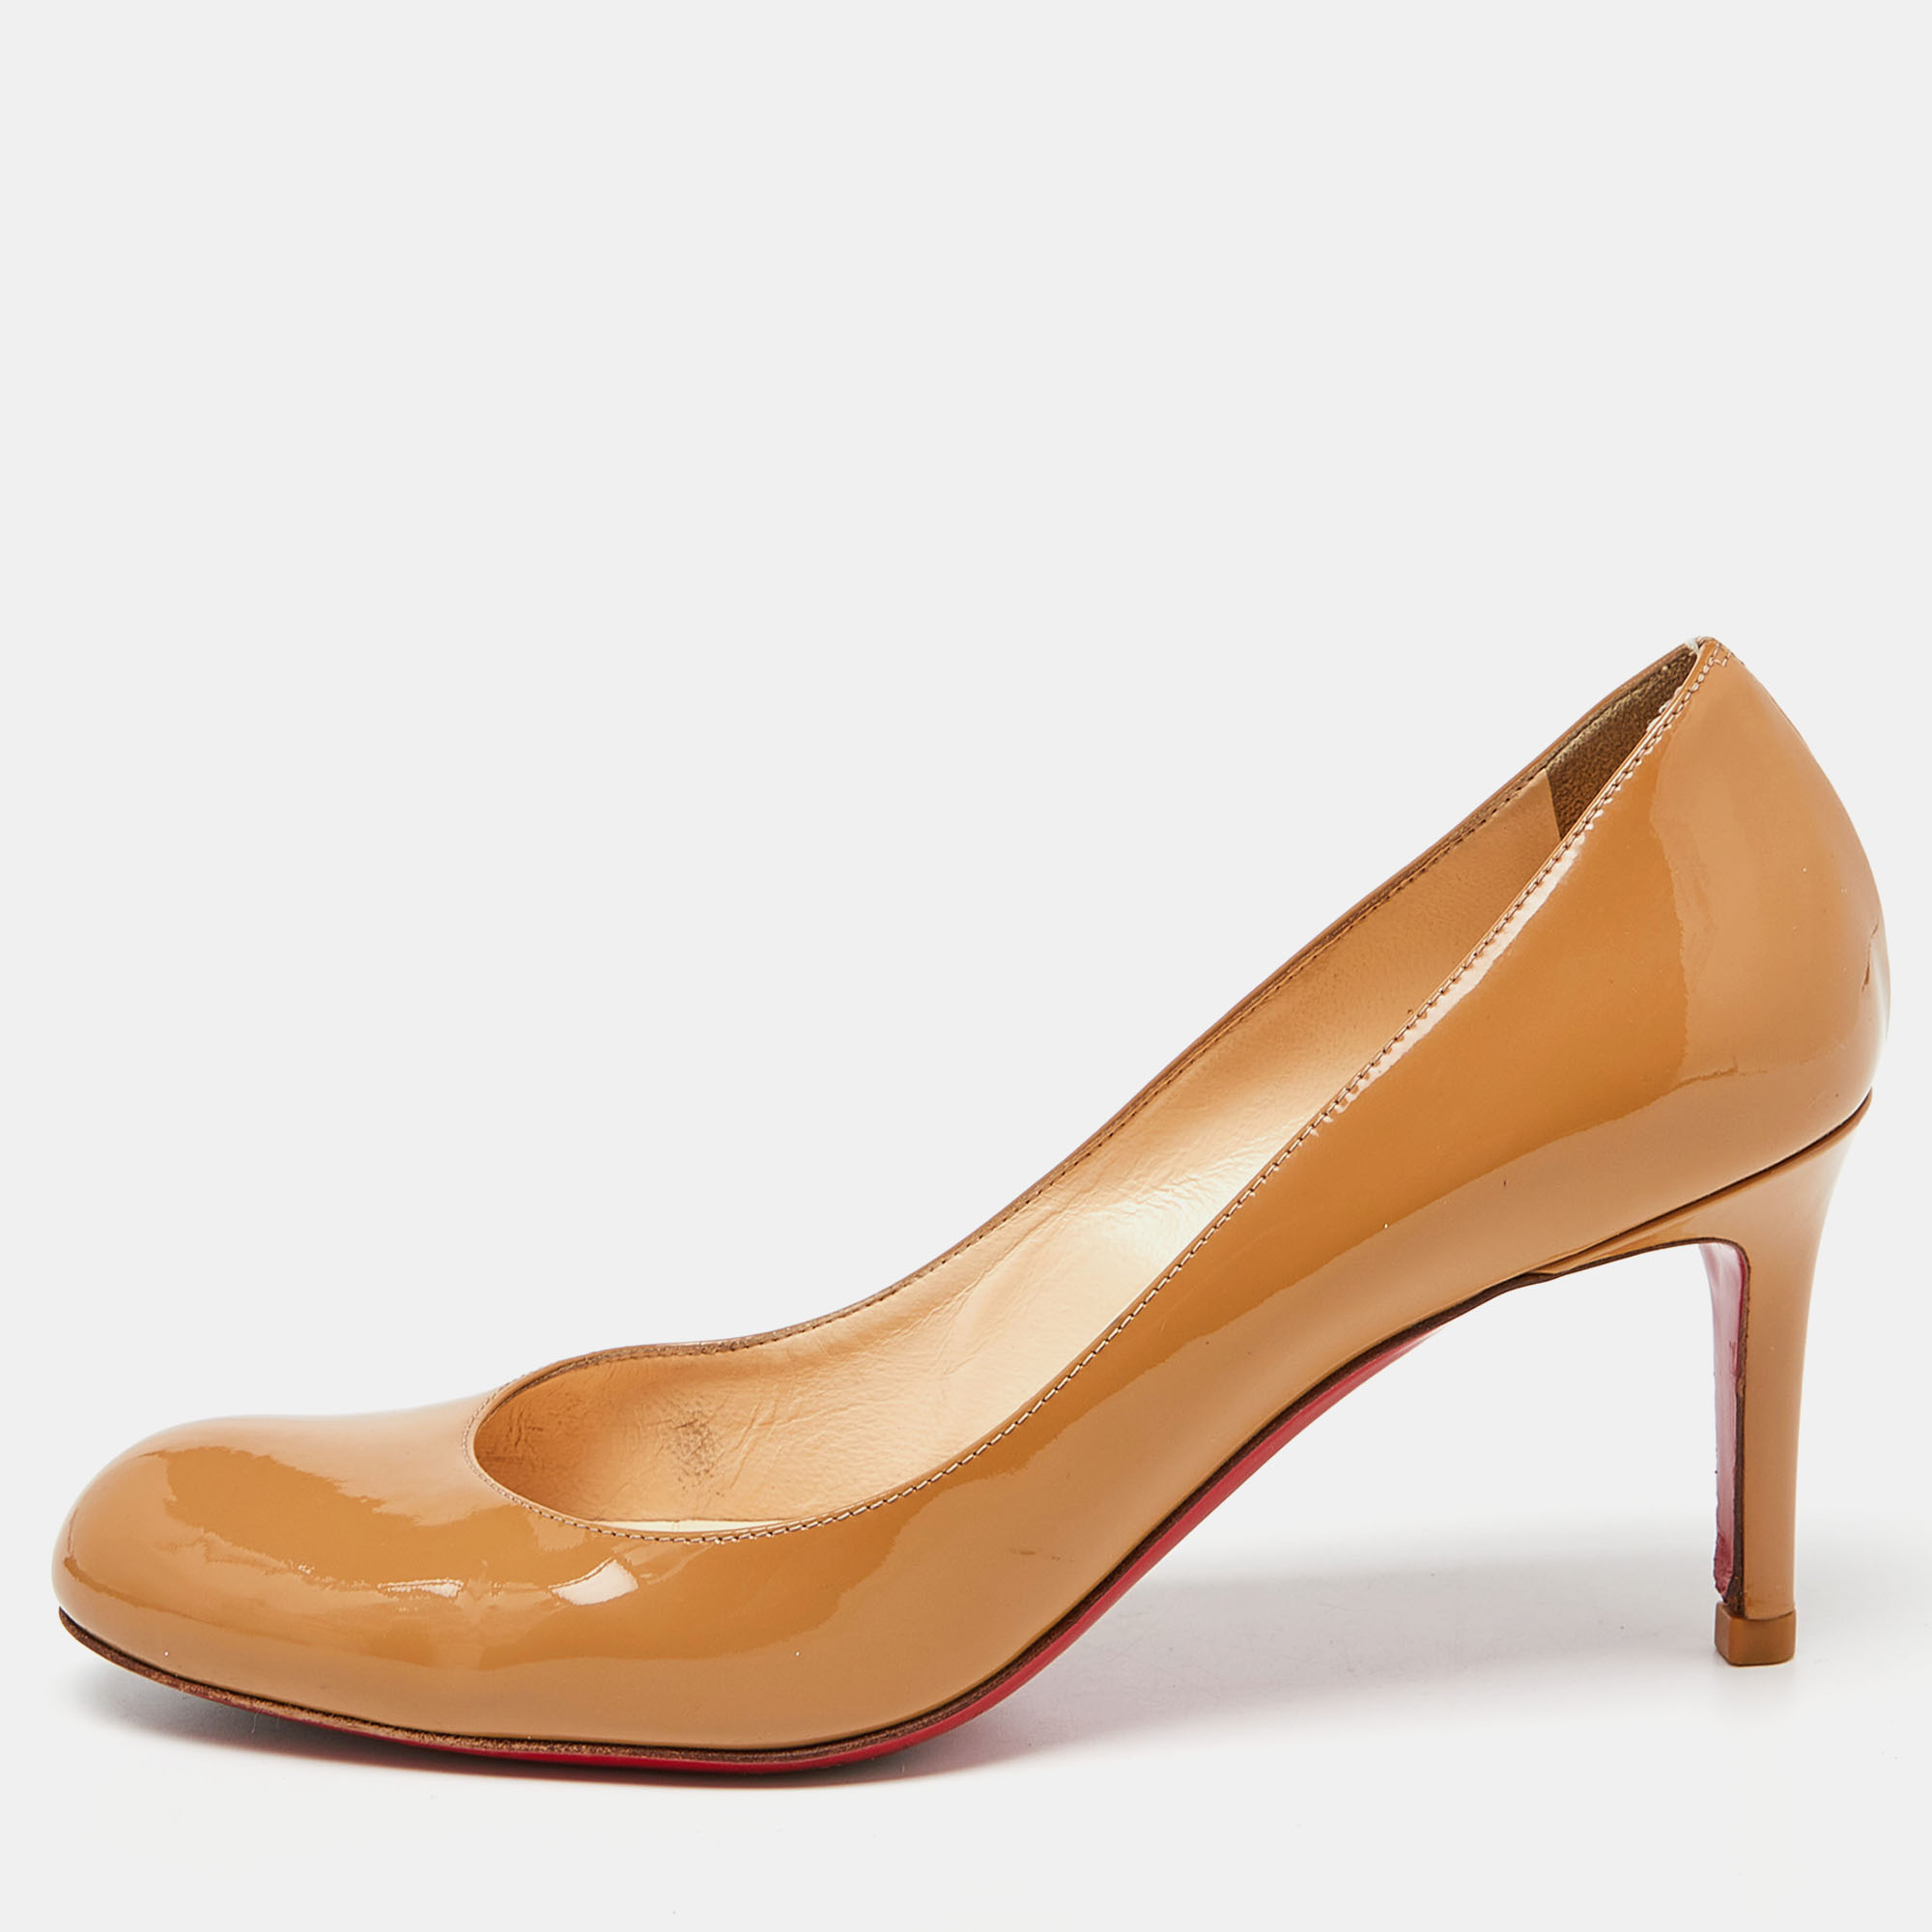 Pre-owned Christian Louboutin Beige Patent Leather Simple Pumps Size 37.5